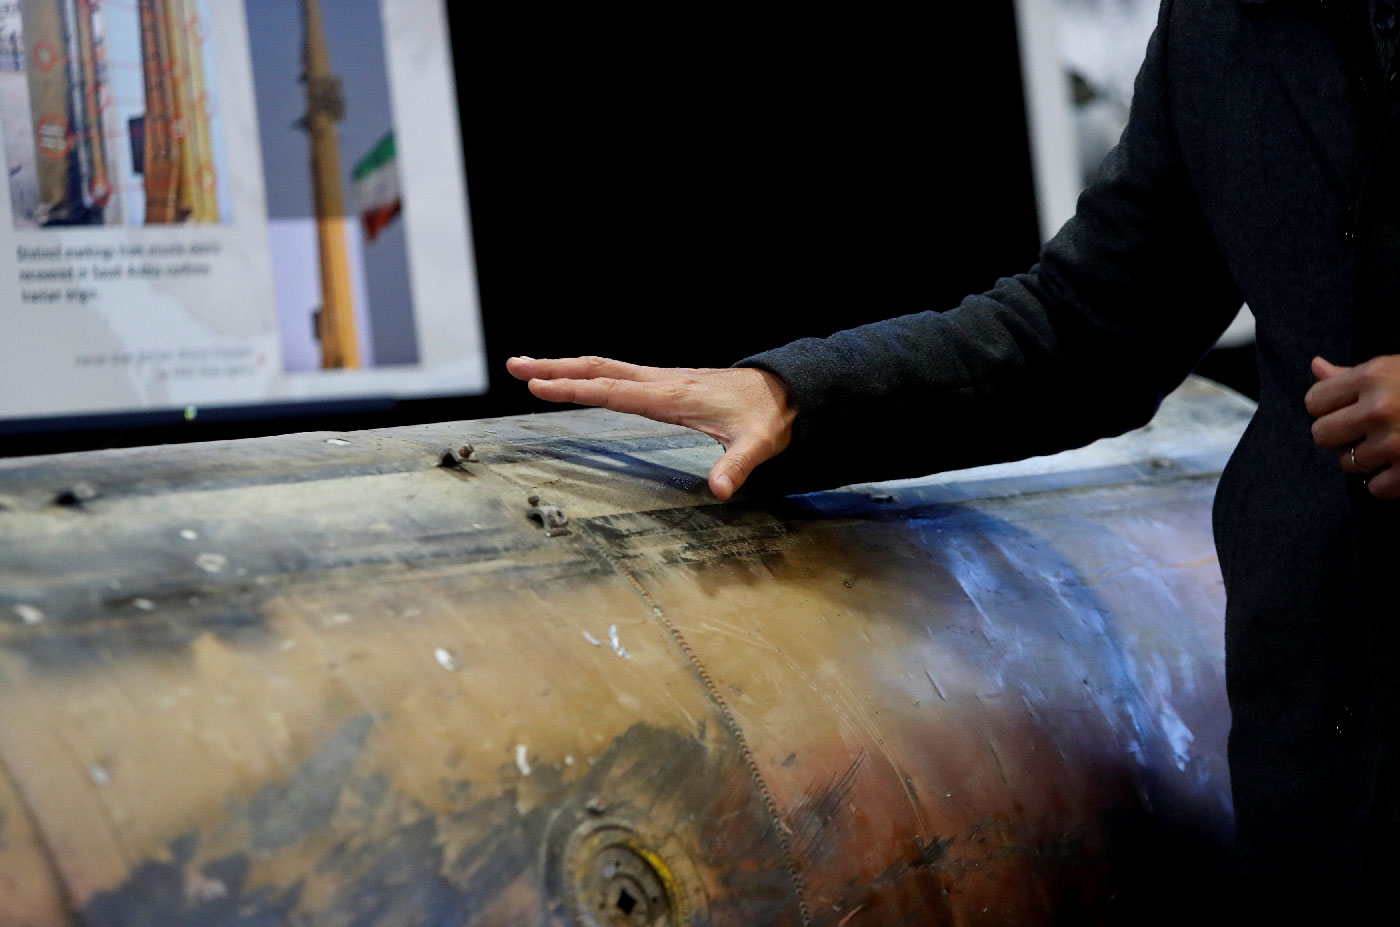 A Middle Eastern journalist touches a missile that the U.S. Defense Department says was manufactured in Iran but that they also claim was fired by Huthi rebels from Yemen into Saudi Arabia in July 2016, as it sits on display at a military base in Washington, U.S., December 13, 2017.